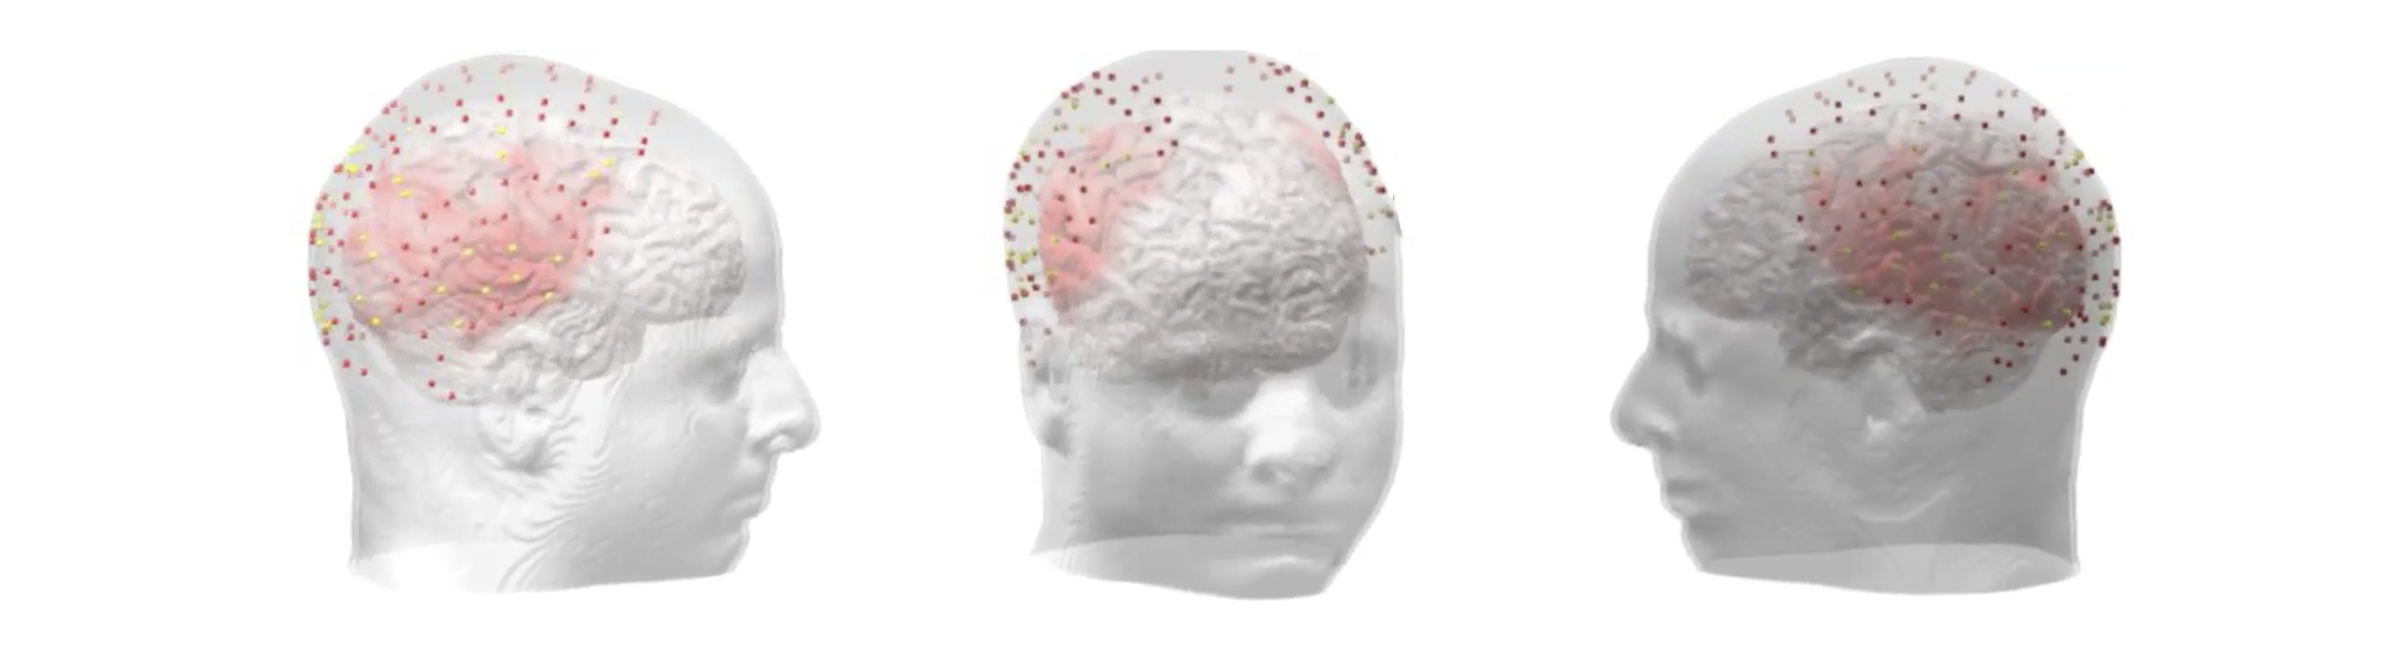 Graphic of see through head with brain and activation points visible